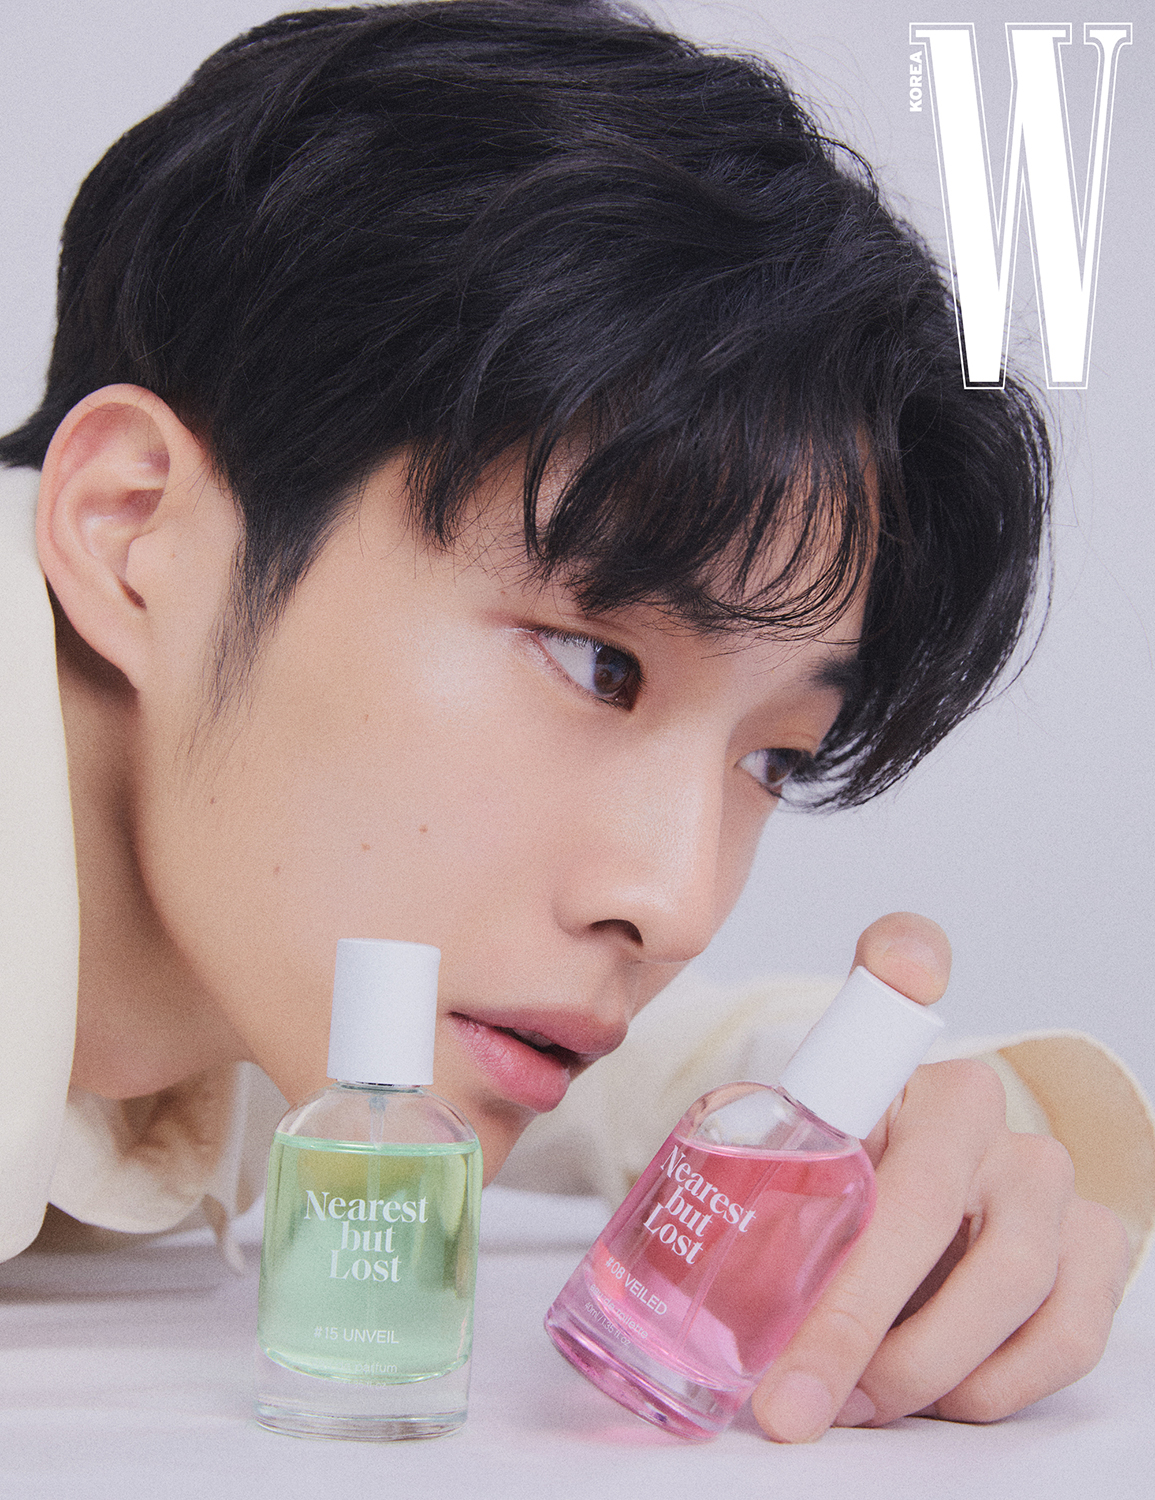 Actor Lee Jong-Won has released a Perfume picture of a fragrant moment.In this picture with fashion magazine W Korea, the holiday season filled with excitement and filled with the warm and romantic moment of actor Lee Jong-Won.Lee Jong-Won, who is with Perfume in the new season of Lost, a good day list to present to his beloved lover, detailed the feeling of Perfume combined with charming fragrance to each mood.Lee Jong-Won in the picture leads the atmosphere of the filming scene with a distinctive feature and sophisticated pose, while freely expressing the gap between the warm and soft Boy and the sophisticated masculine beauty.Lee Jong-Won, who is meeting viewers who are disassembled from the MBC drama Spy who loved me to Tinker, is showing the charm of the drama and the drama that is warm and cool in the industry.Through this picture, I renewed my new image again and showed my colorful charm without any boldness.iMBC Park Han-bum  Photos Provided W KOREA (W Korea